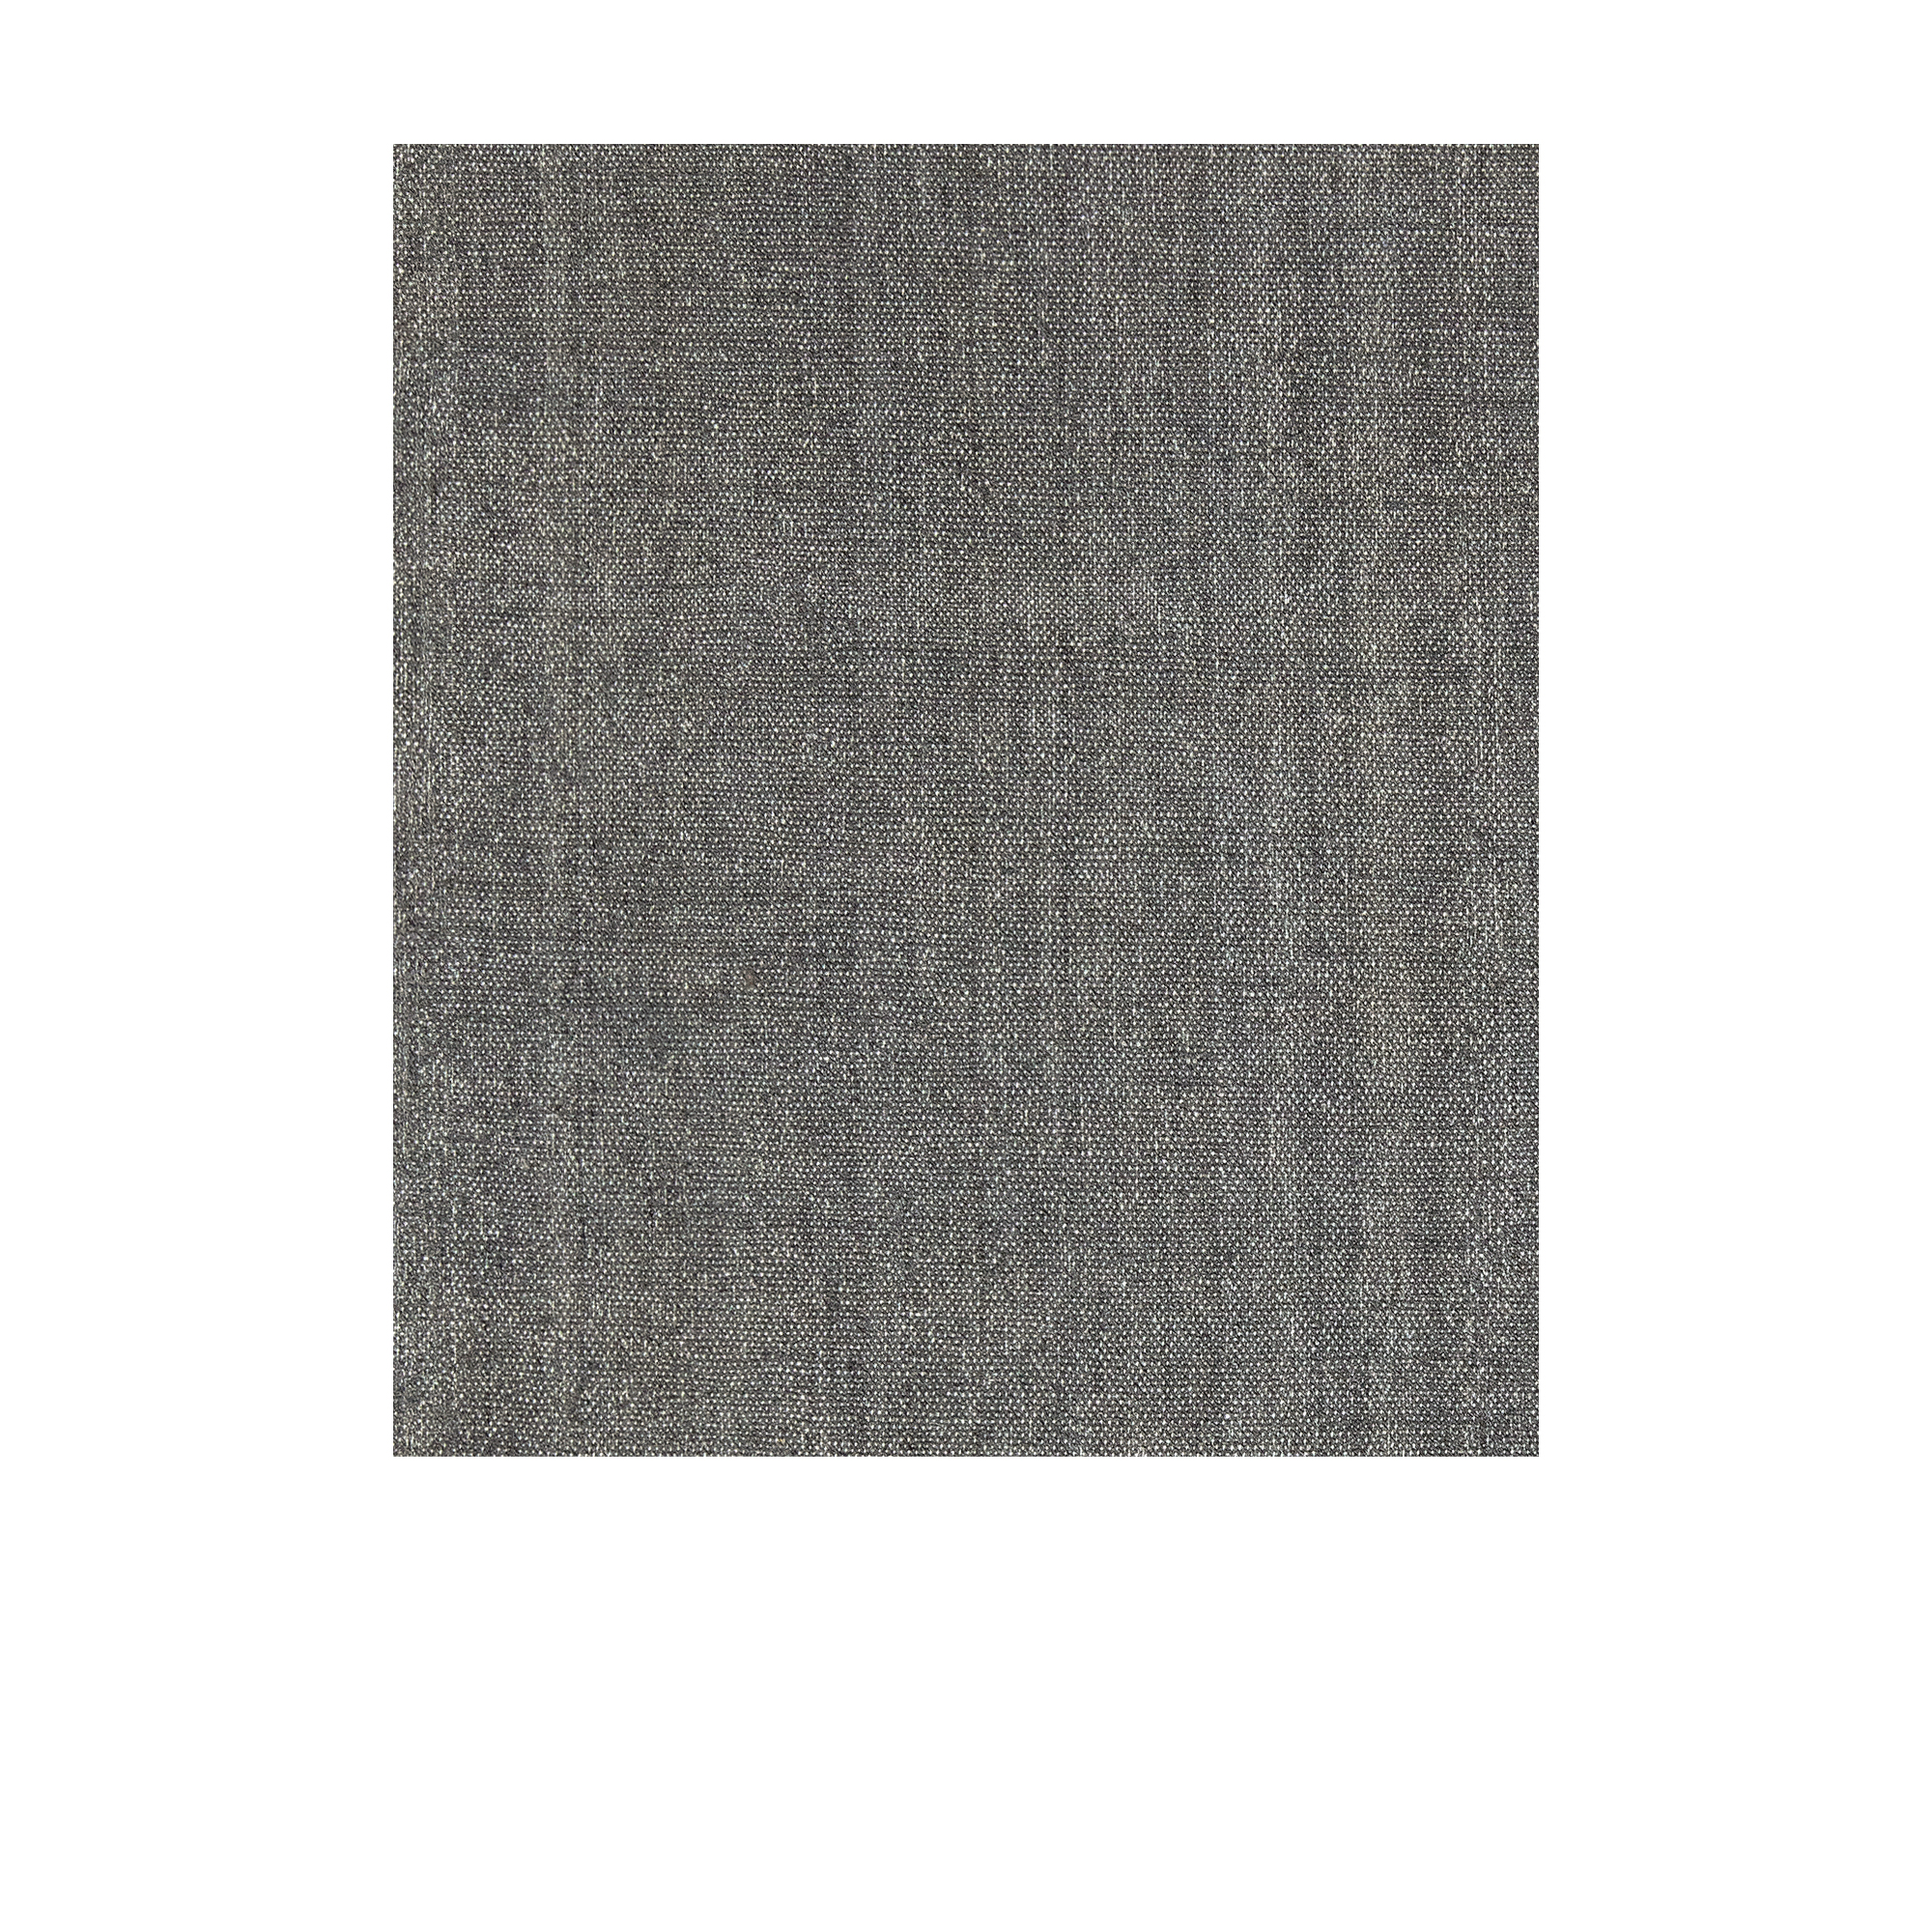 This Flatweave rug is handwoven and made of 100% wool.